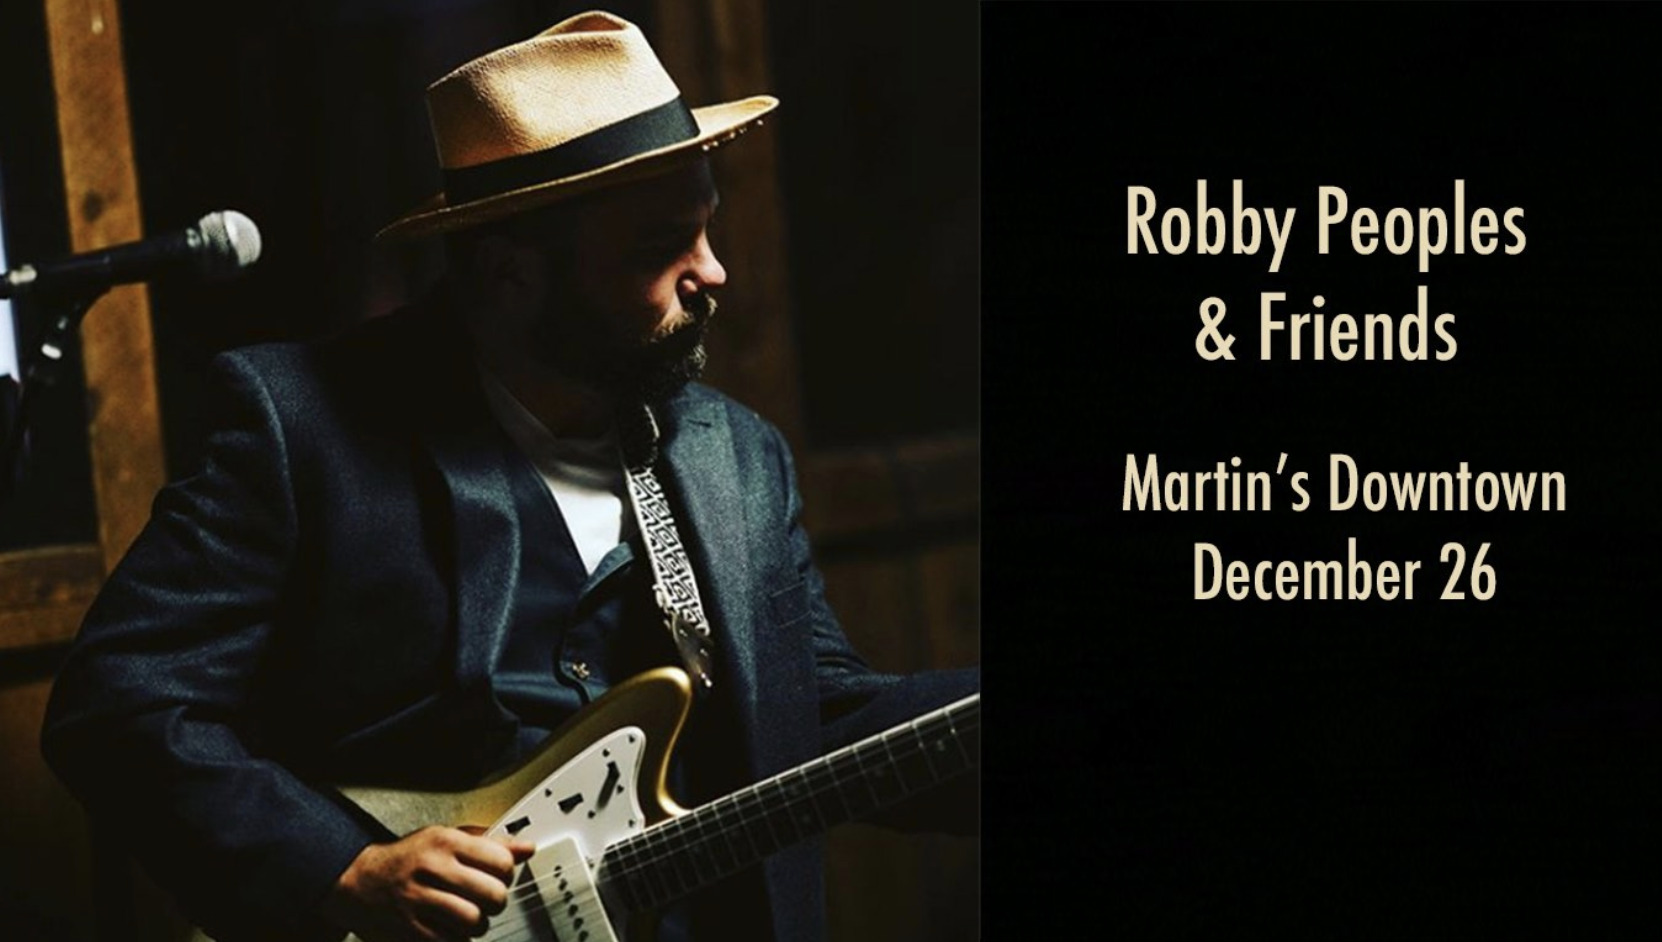 Robby Peoples & Friends at Martin’s Downtown